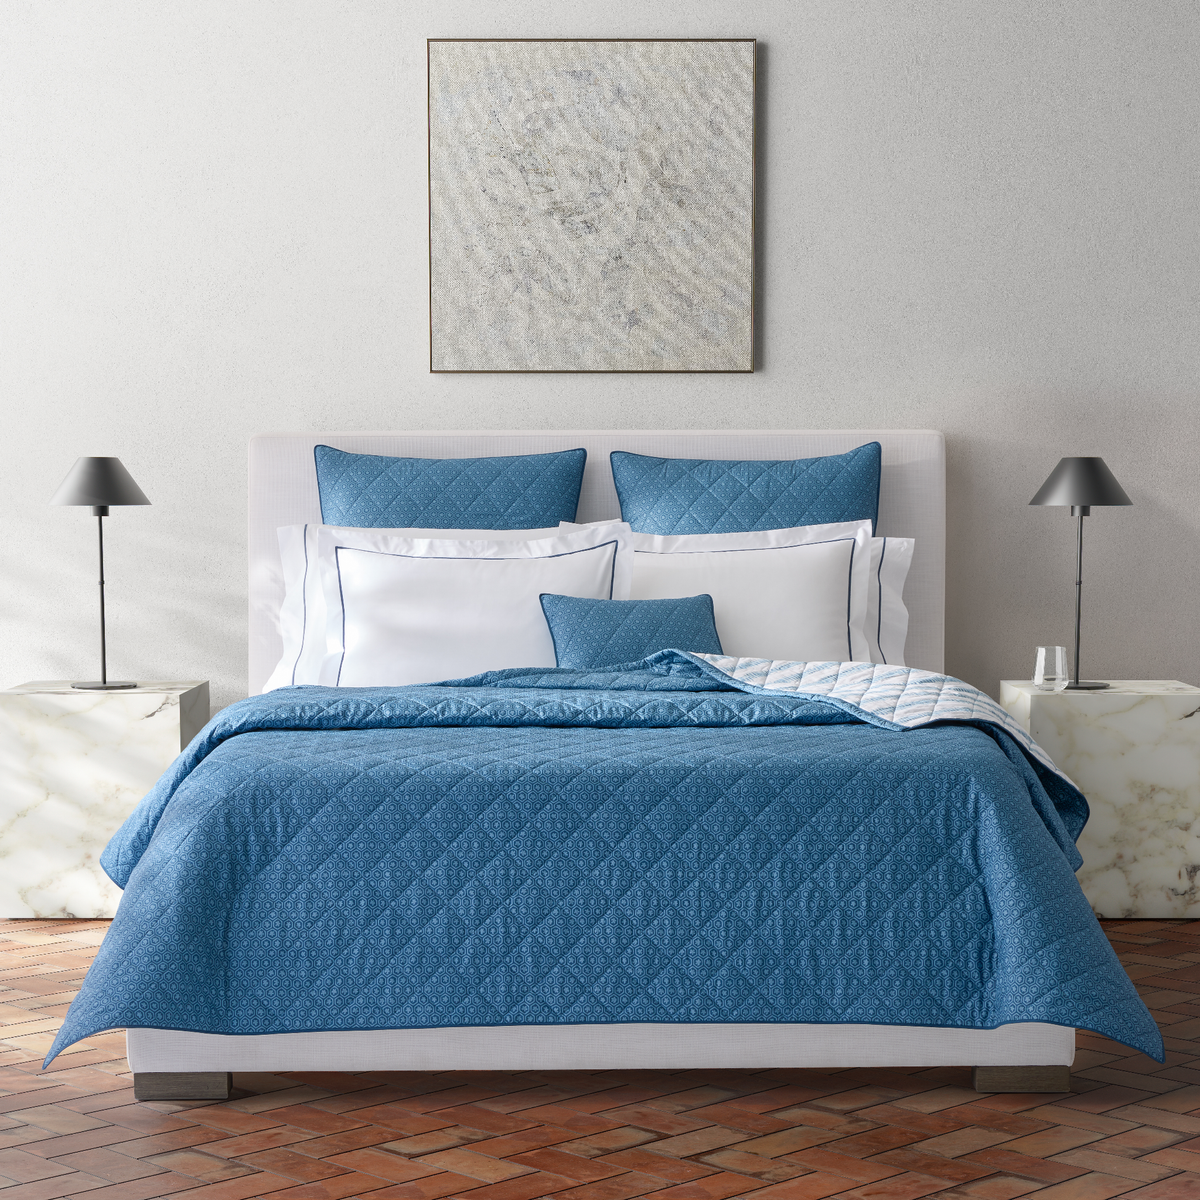 Full Bed Dressed in Prussian Blue Quilted Matouk Schumacher Levi Bedding